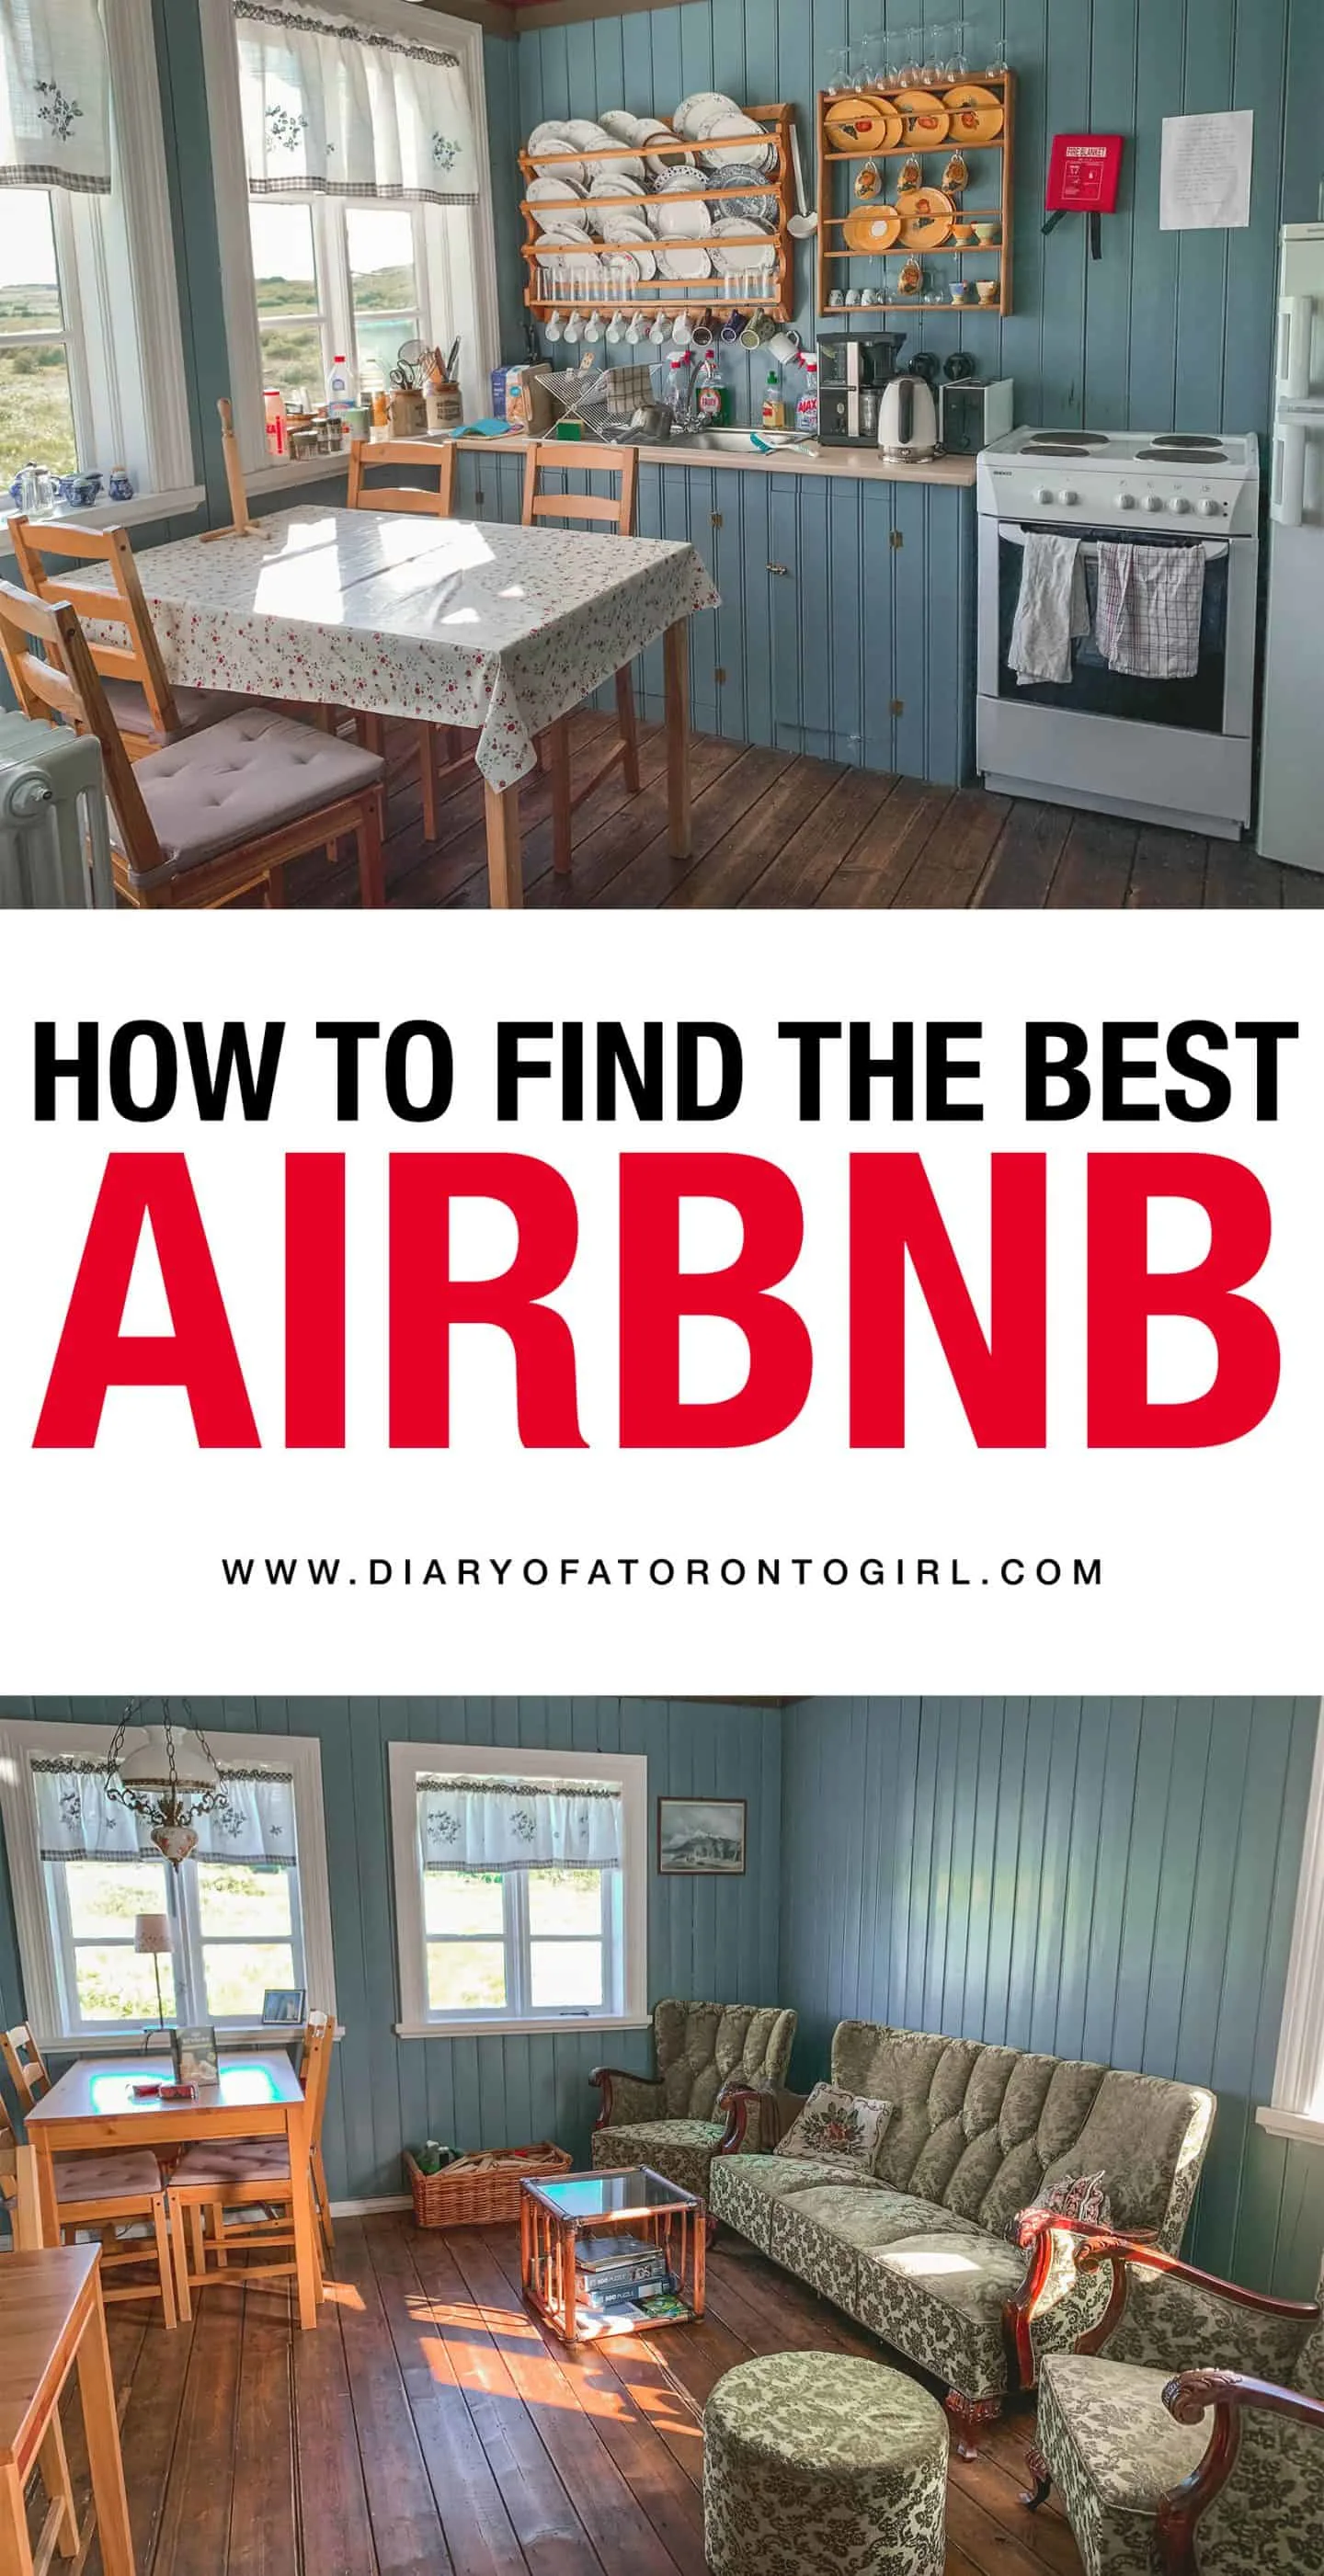 The ultimate guide on how to find the best Airbnb for your vacation, whether you're a budget traveler or just someone looking for a more local experience!